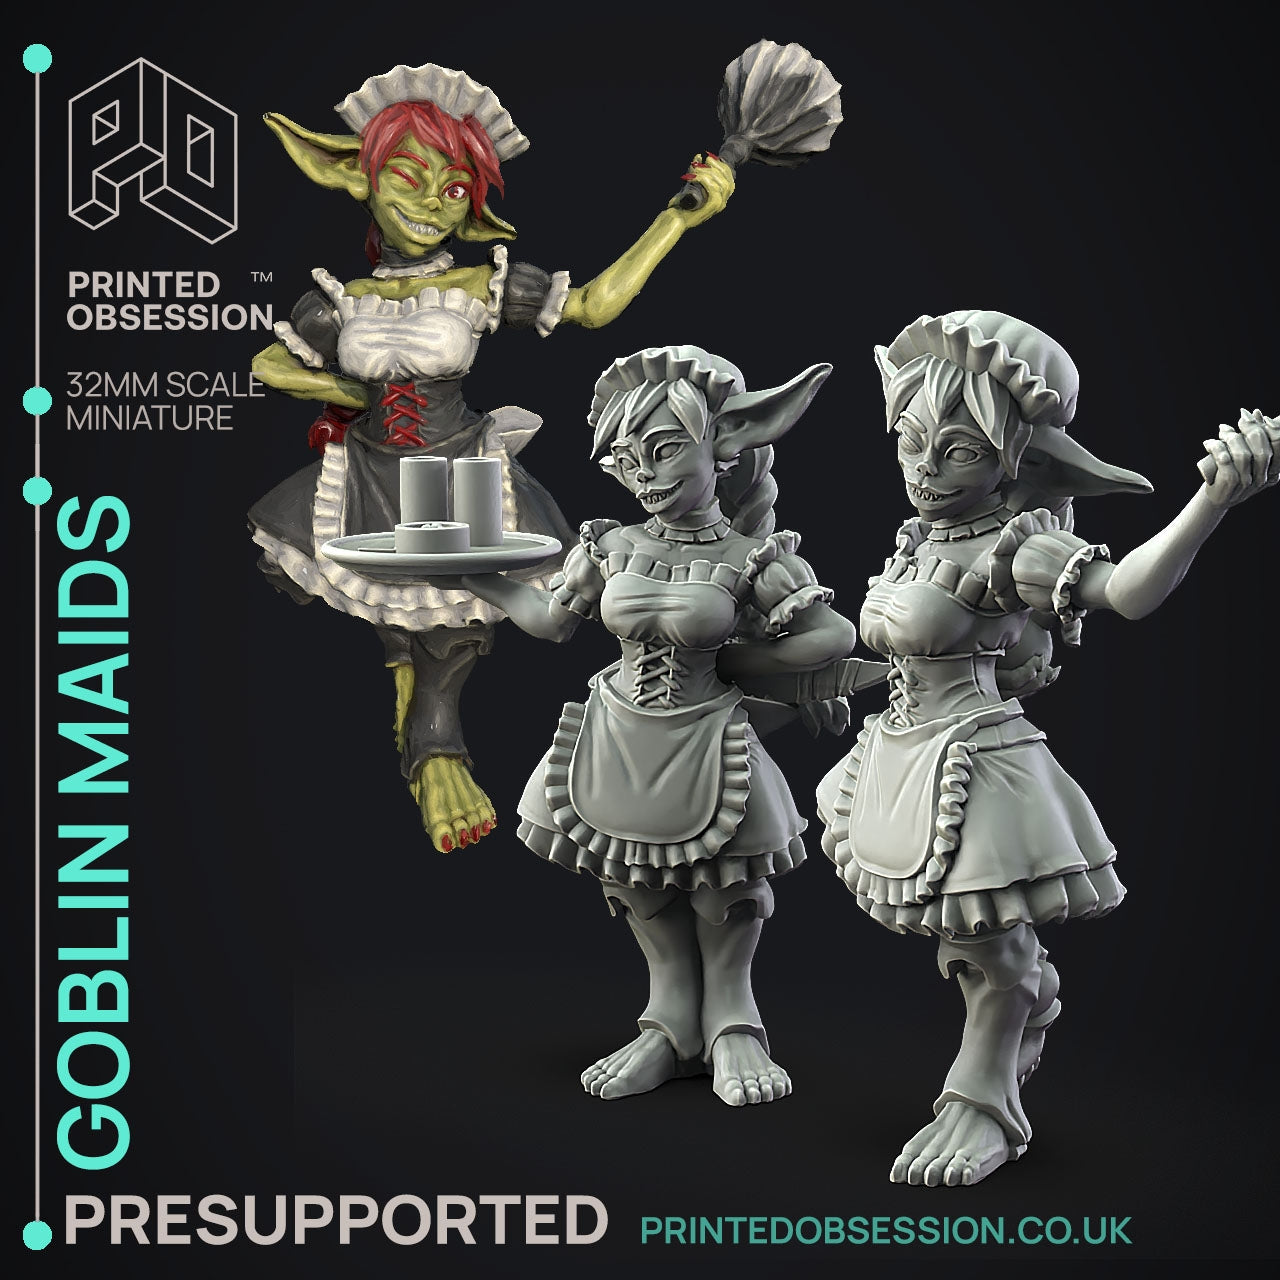 The Goblin Maids Dungeon Cleaning Inc. - The Printed Obsession - Table-top mini, 3D Printed Collectable for painting and playing!